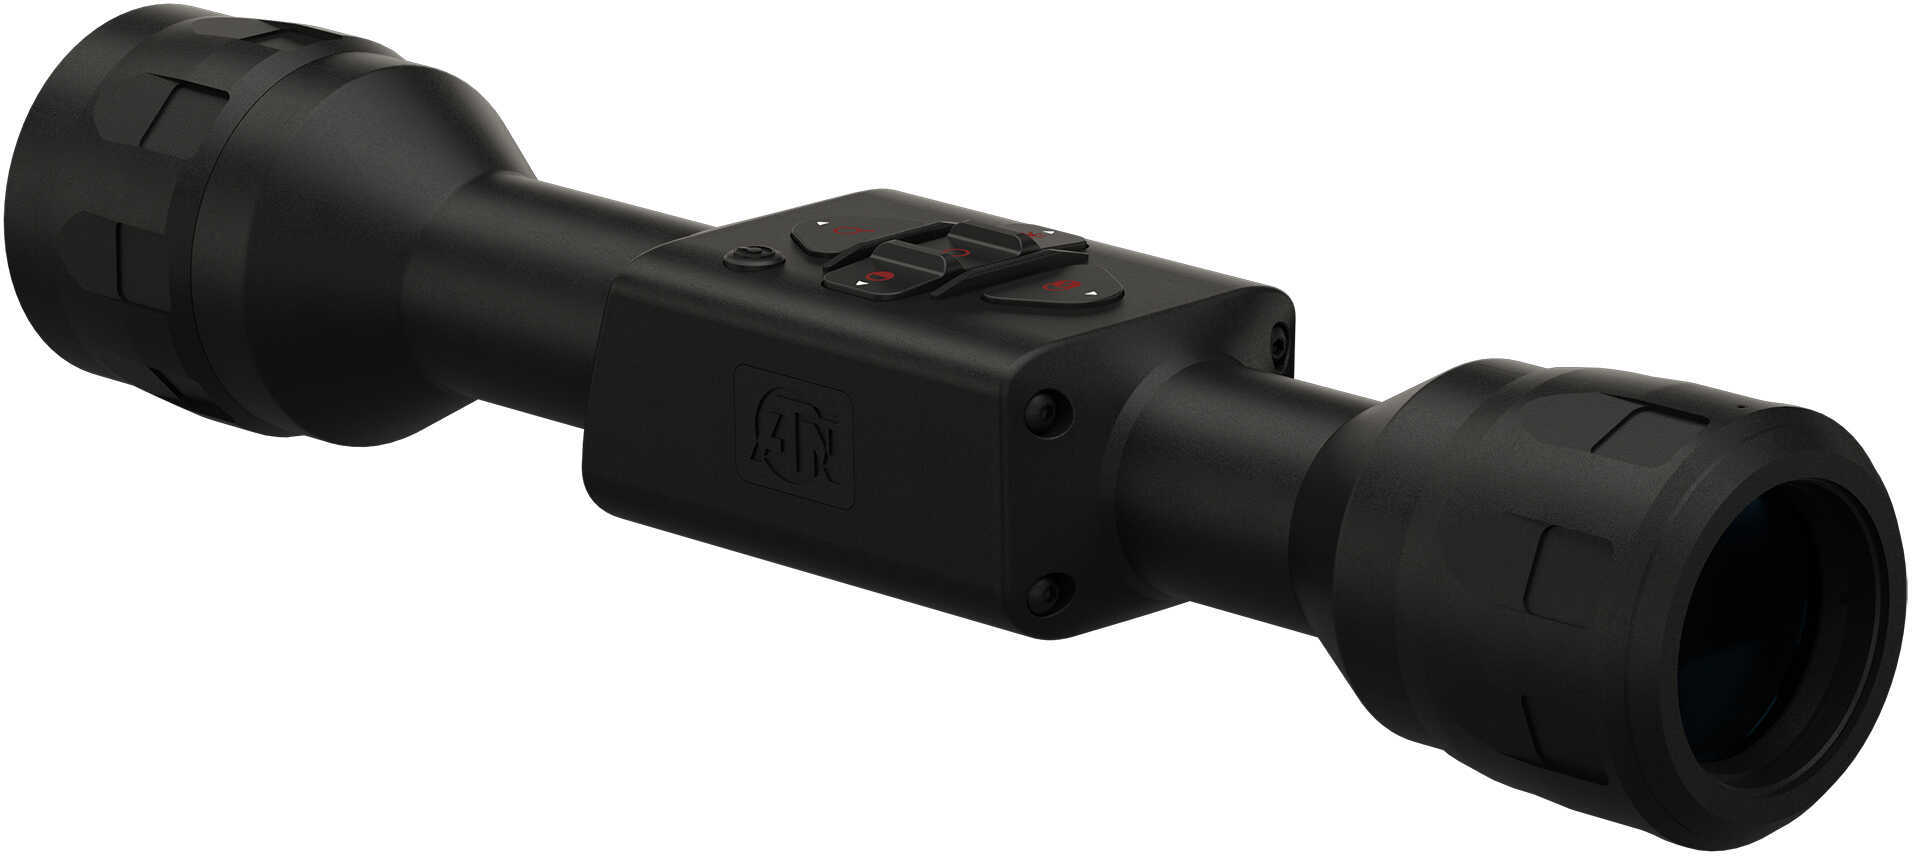 ATN ThOR-LT 160 Thermal Weapon Sight 3-6X Black 30mm Tube 7 Different Reticles with Choice of Color: Red/Green/B